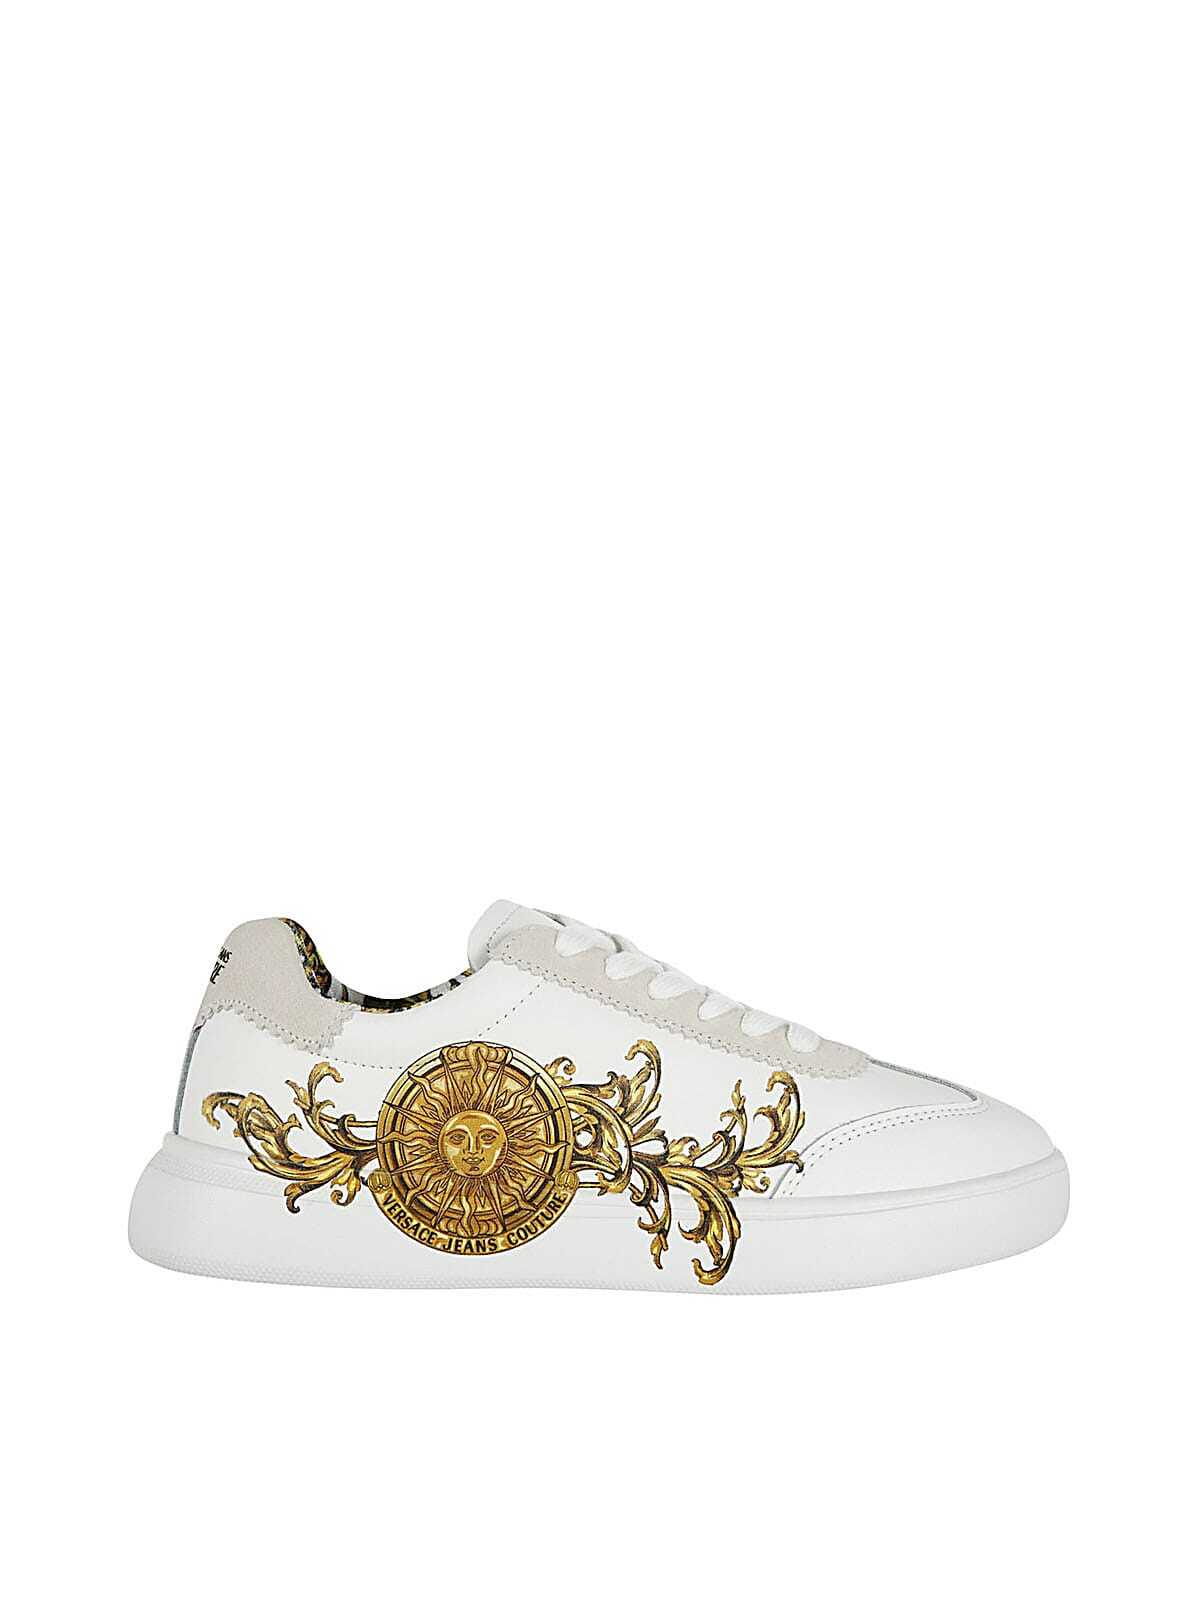 Versace Jeans Couture Logo Light Dis 28 Shoes Leather Suede in gold / white